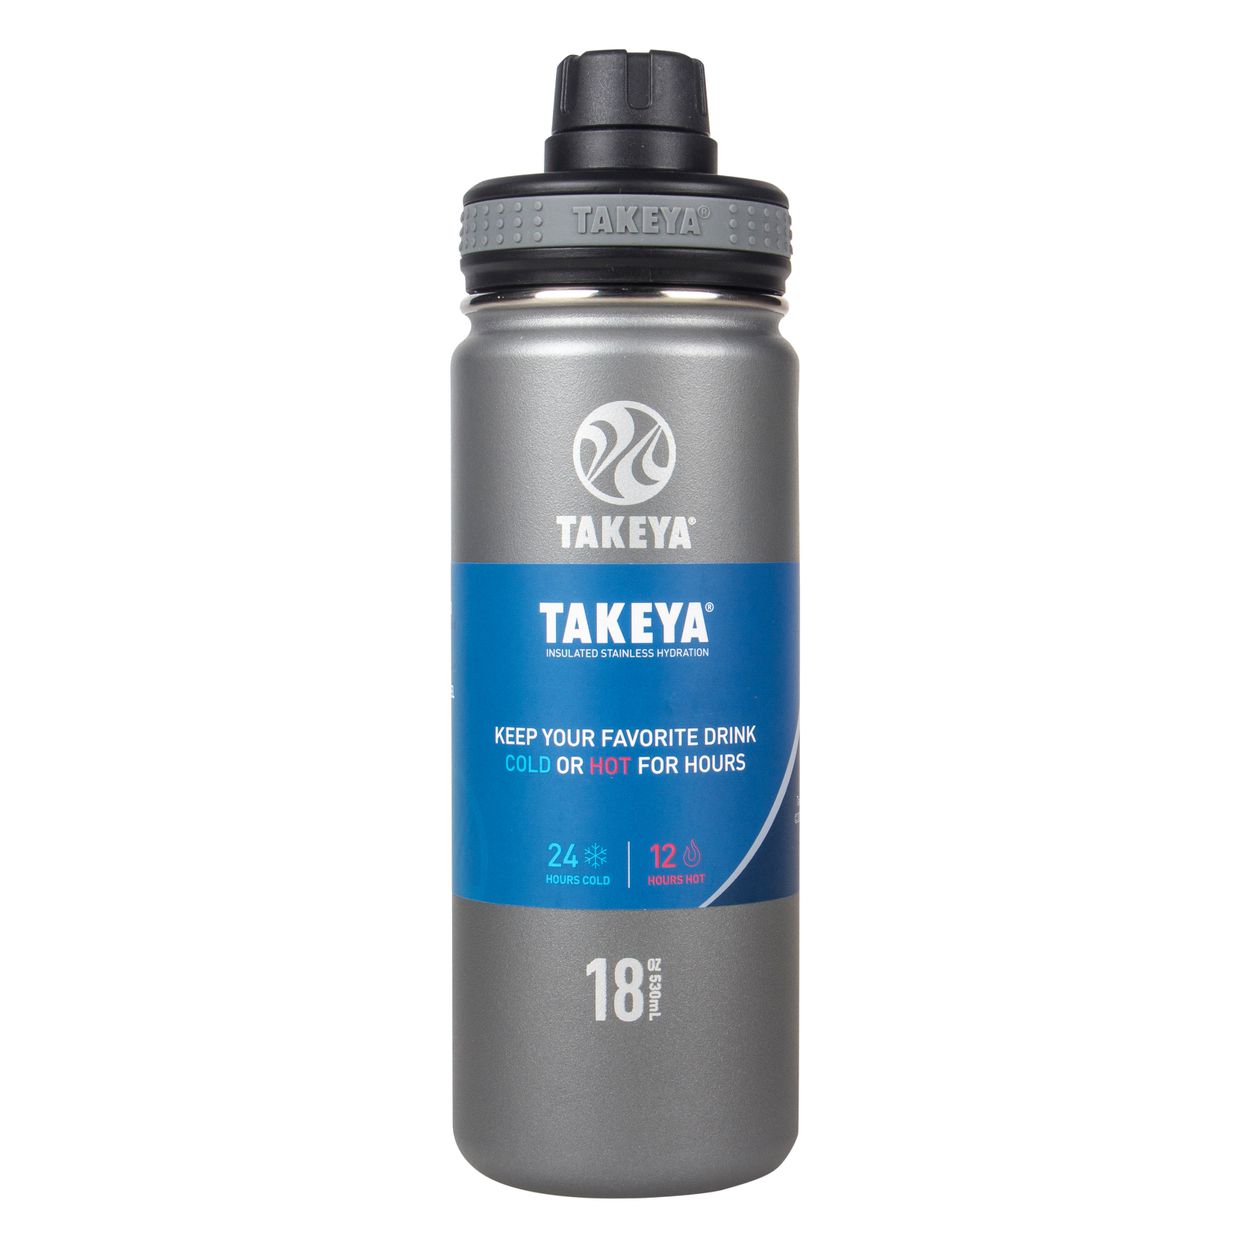 NEW Takeya ThermoFlask Stainless Steel Water Bottle 24oz 2-pack 24 hours cold 